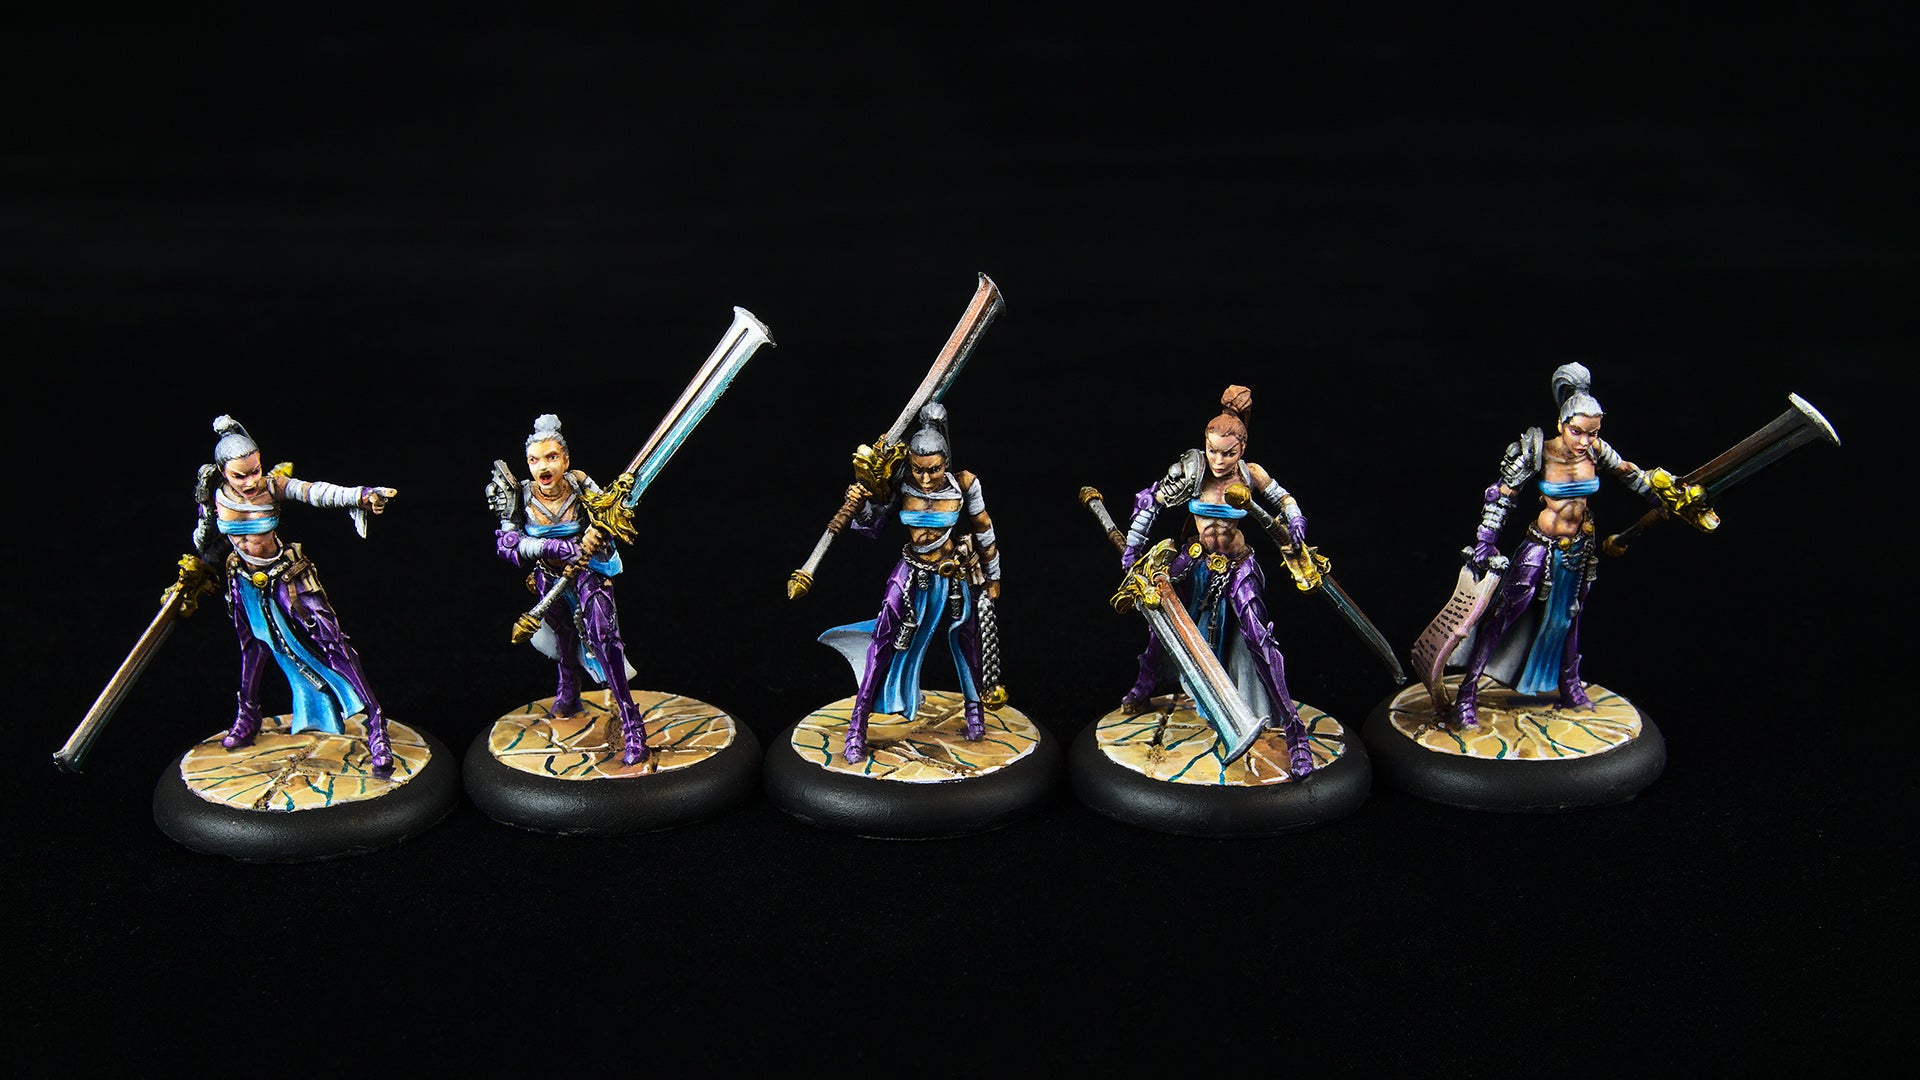 Have a look at these painted armies!